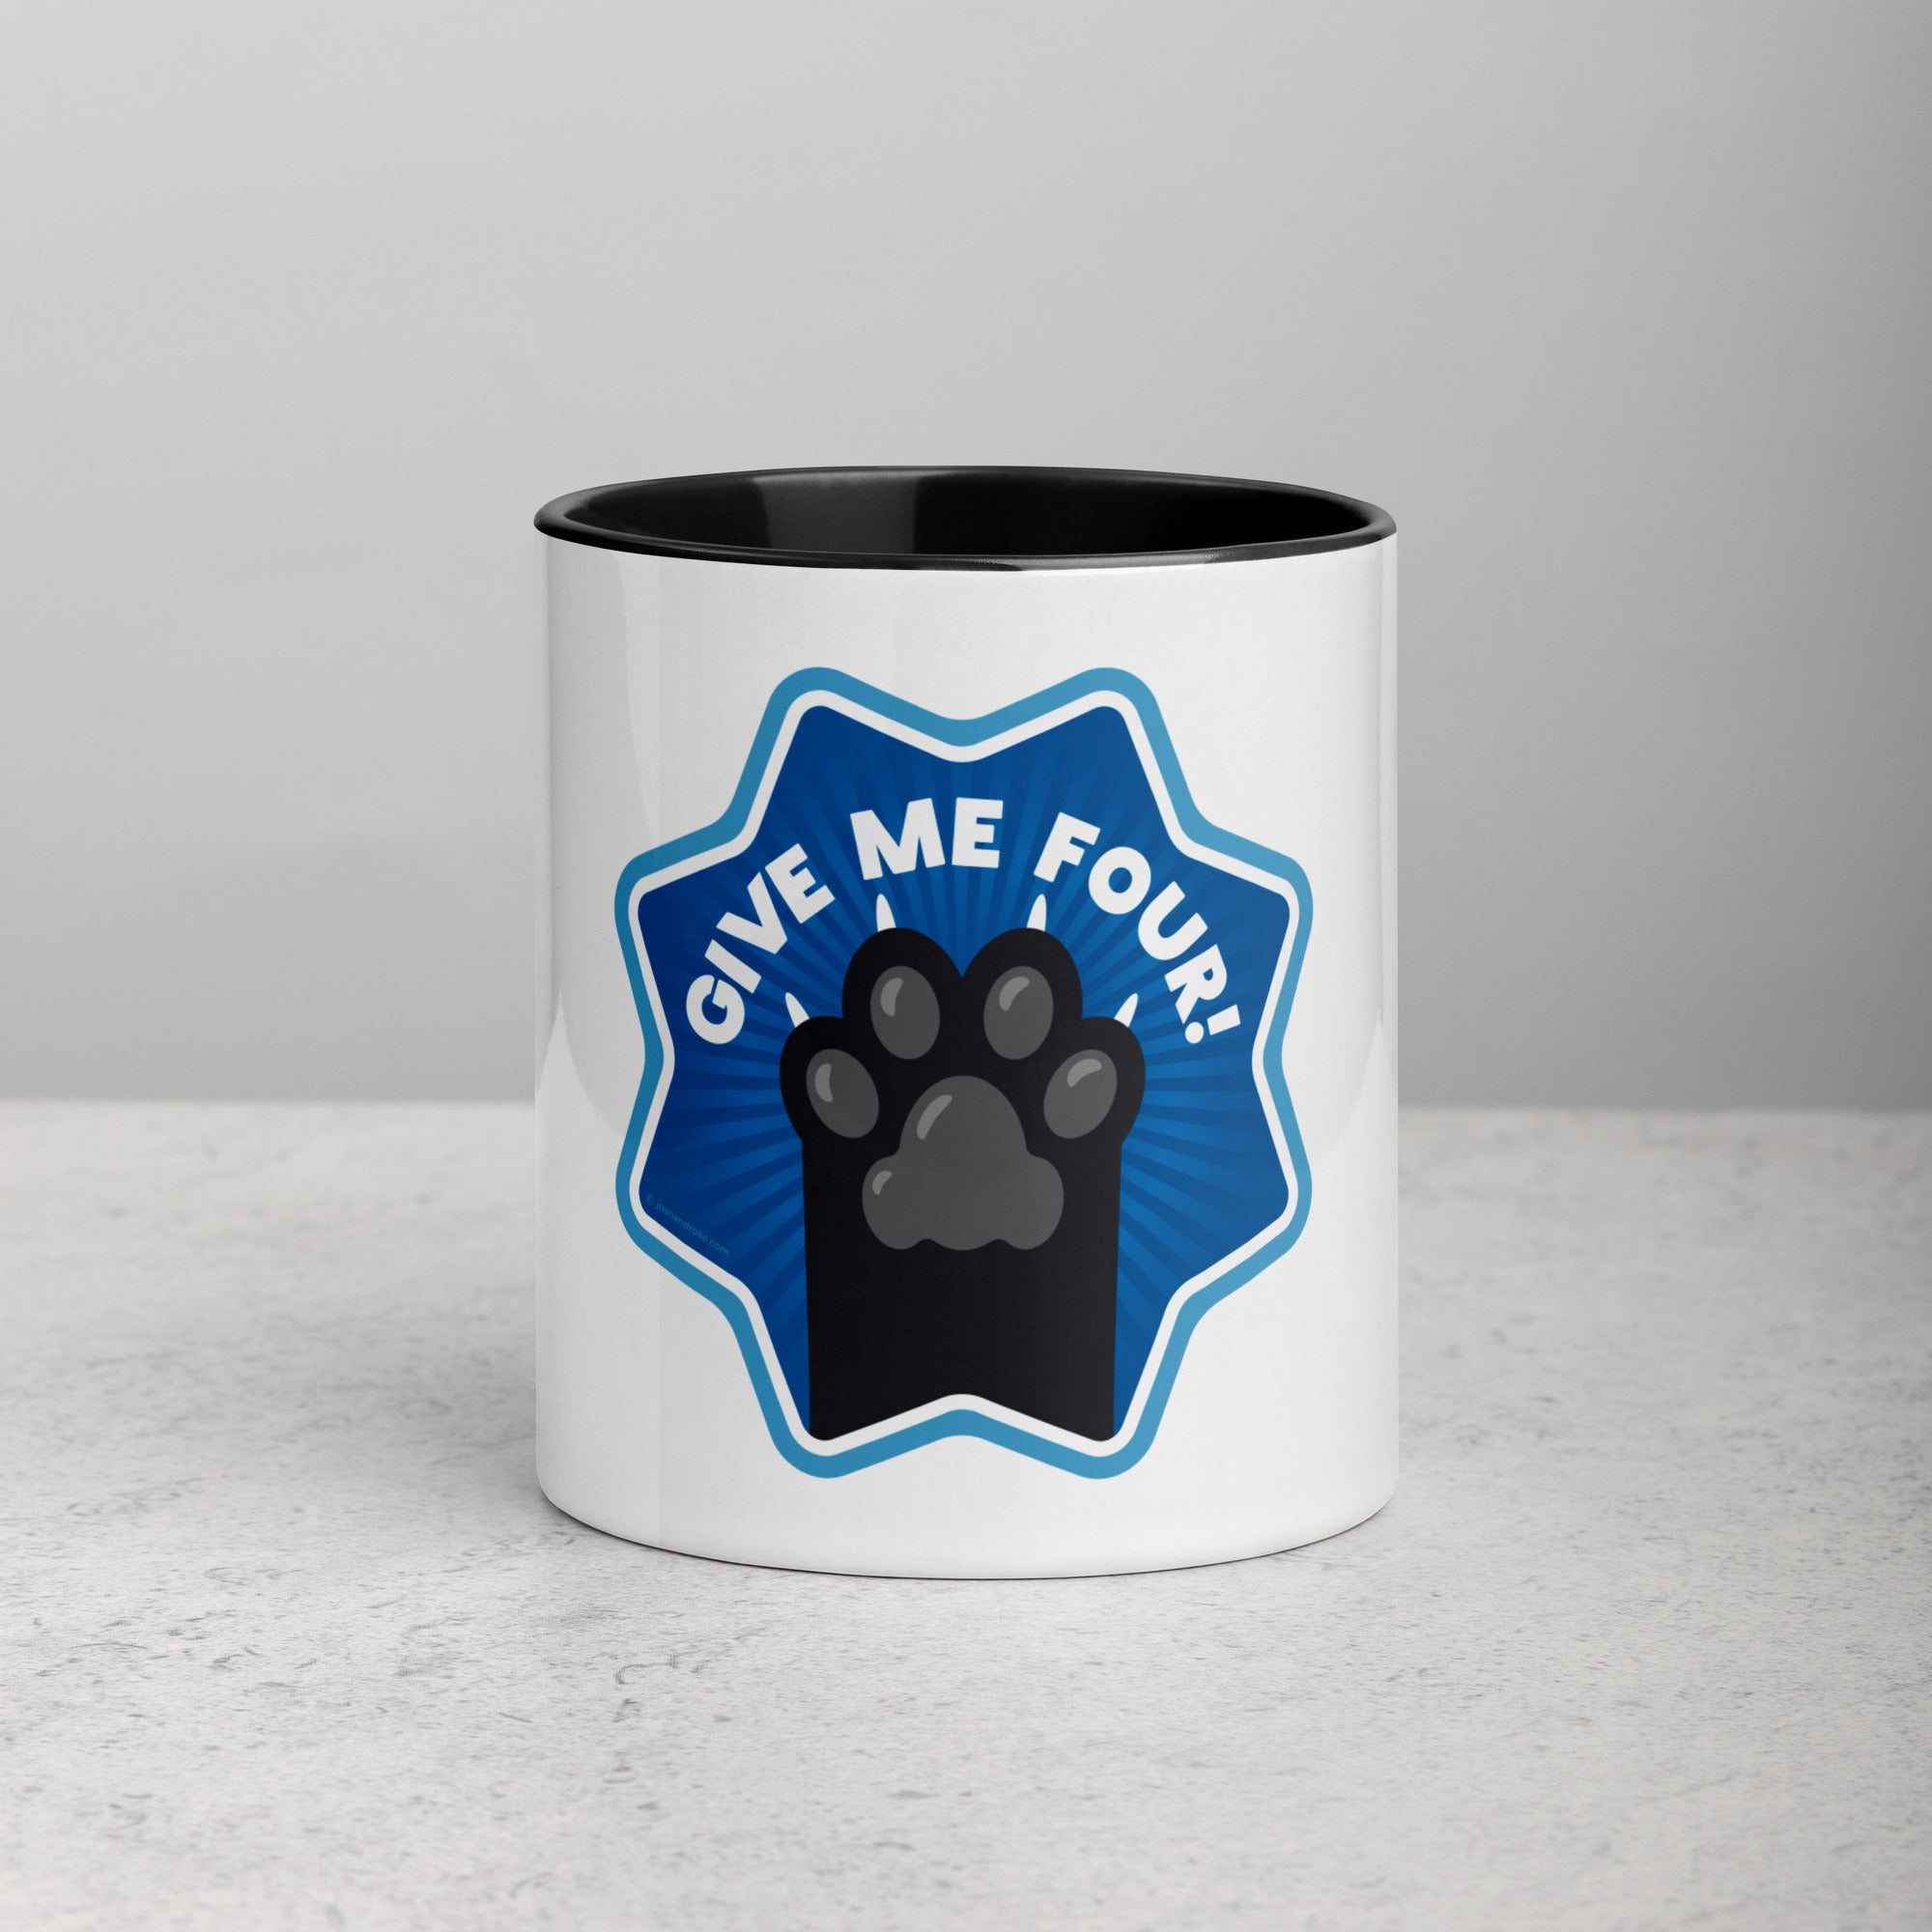 front facing image of a white mug with black interior and handle. Mug has image of black cats paw on a blue 8 sided star with the text 'give me four' 